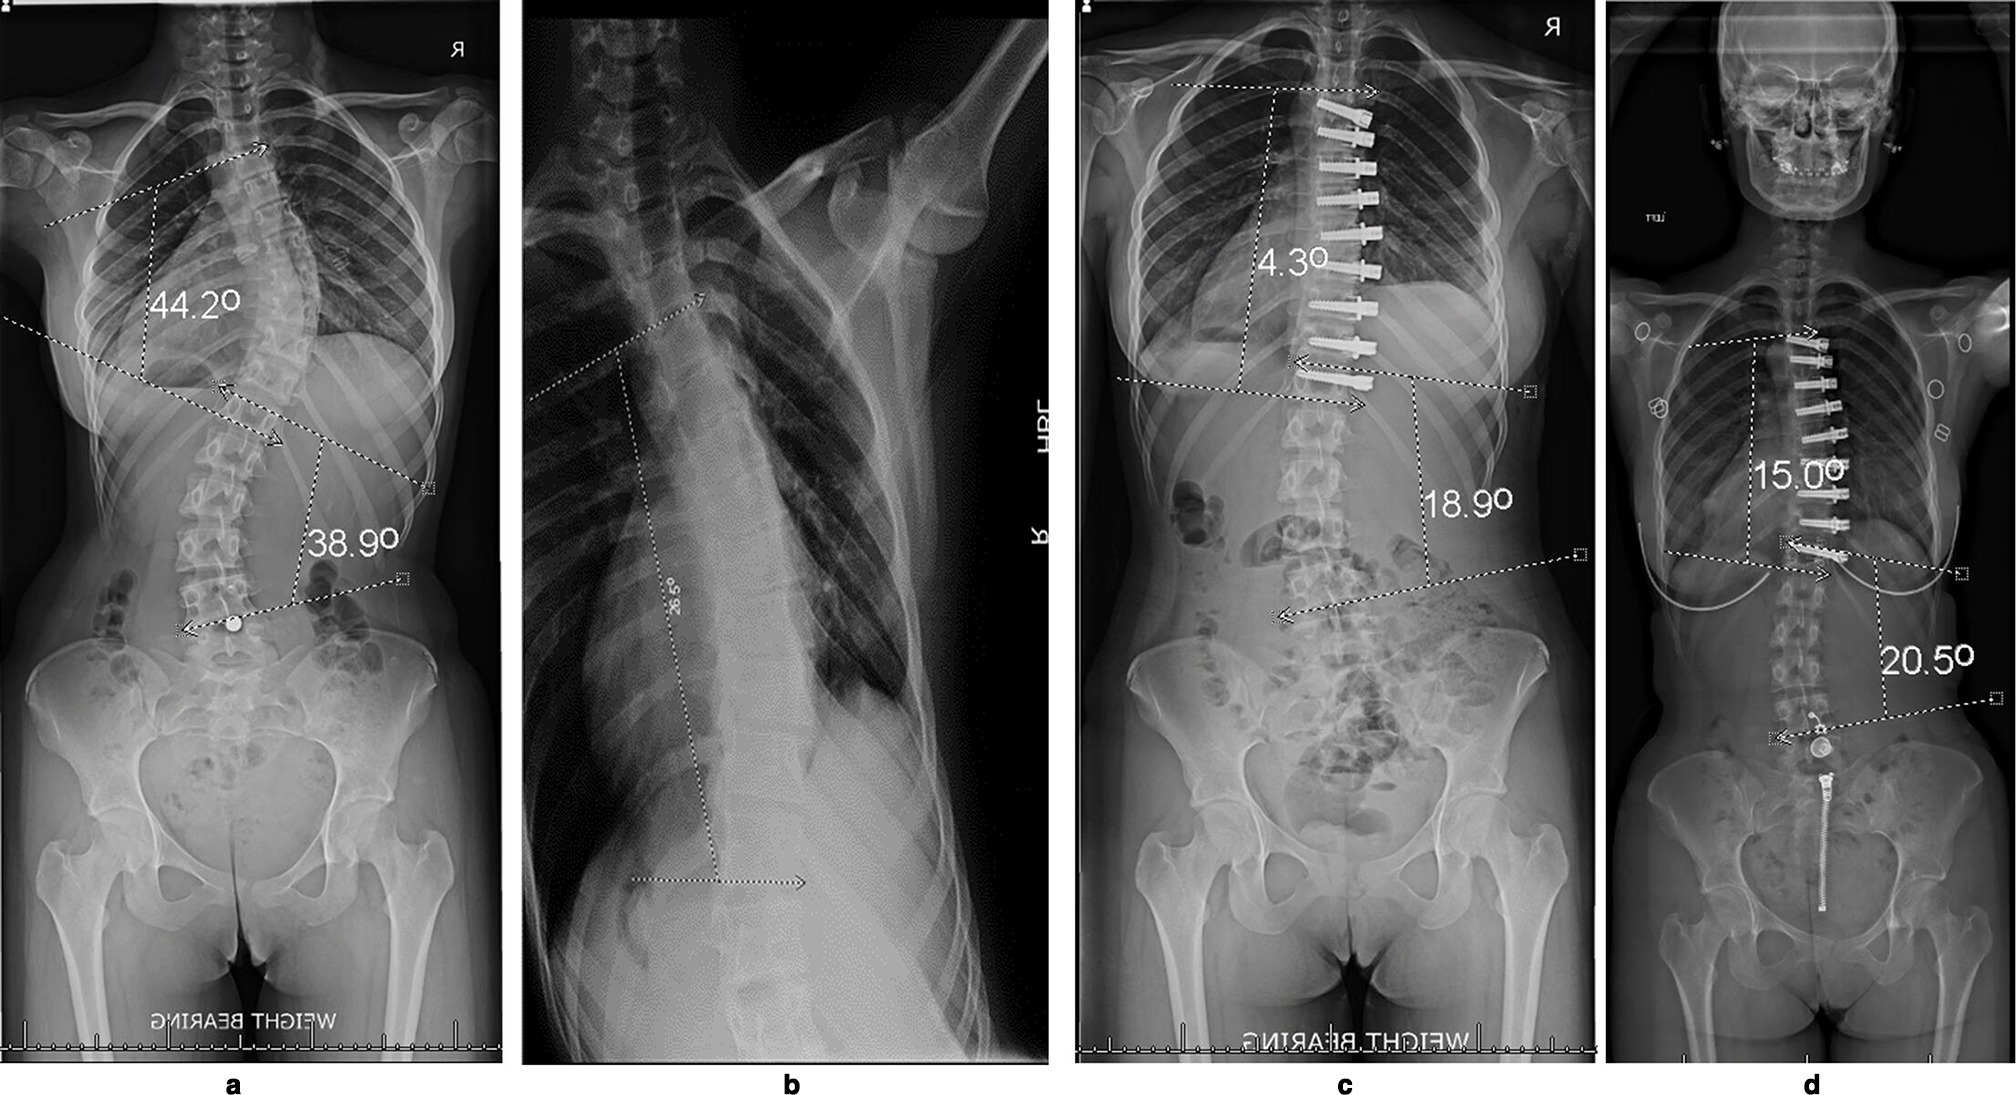 Fig. 4 
          This 14-year-old female patient was in the Group Risser Grade 3 to 5 vertebral body tethering anterior scoliosis correction. a) The main thoracic (MT) Cobb angle was 44.2° and thoracolumbar Cobb angle was 38.9°. She is categorized as Risser 4 and the tri-radiate cartilages are closed. b) The bending radiograph shows an unbend Cobb of 26.5° c) Six weeks postoperatively the MT Cobb angle of was 4.3° and the thoracolumbar (TL) Cobb angle was 18.9°. Note that this is better than the unbend Cobb angle on bending radiograph. d) Radiographs five years postoperatively show maintained improvement, but there is some stress relaxation with the Cobb angles, with the MT 15° and the TL 20.5°.
        